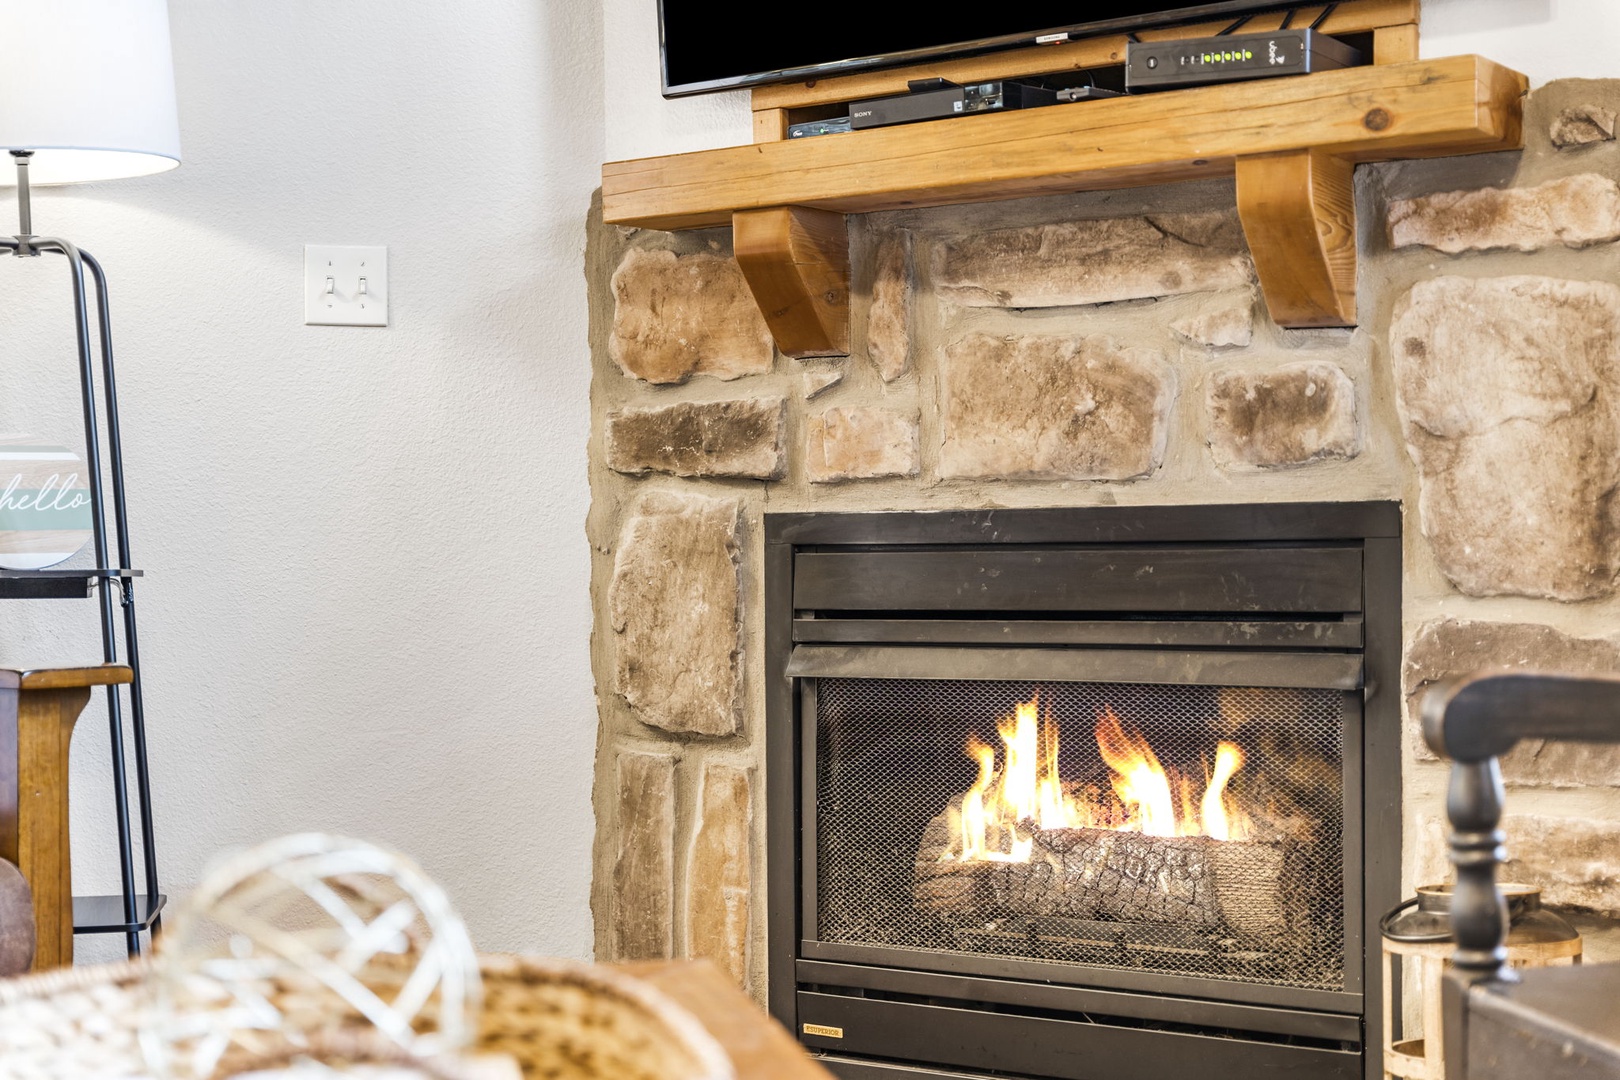 Kick back and relax next to a warming fire in your very own Gas Fireplace